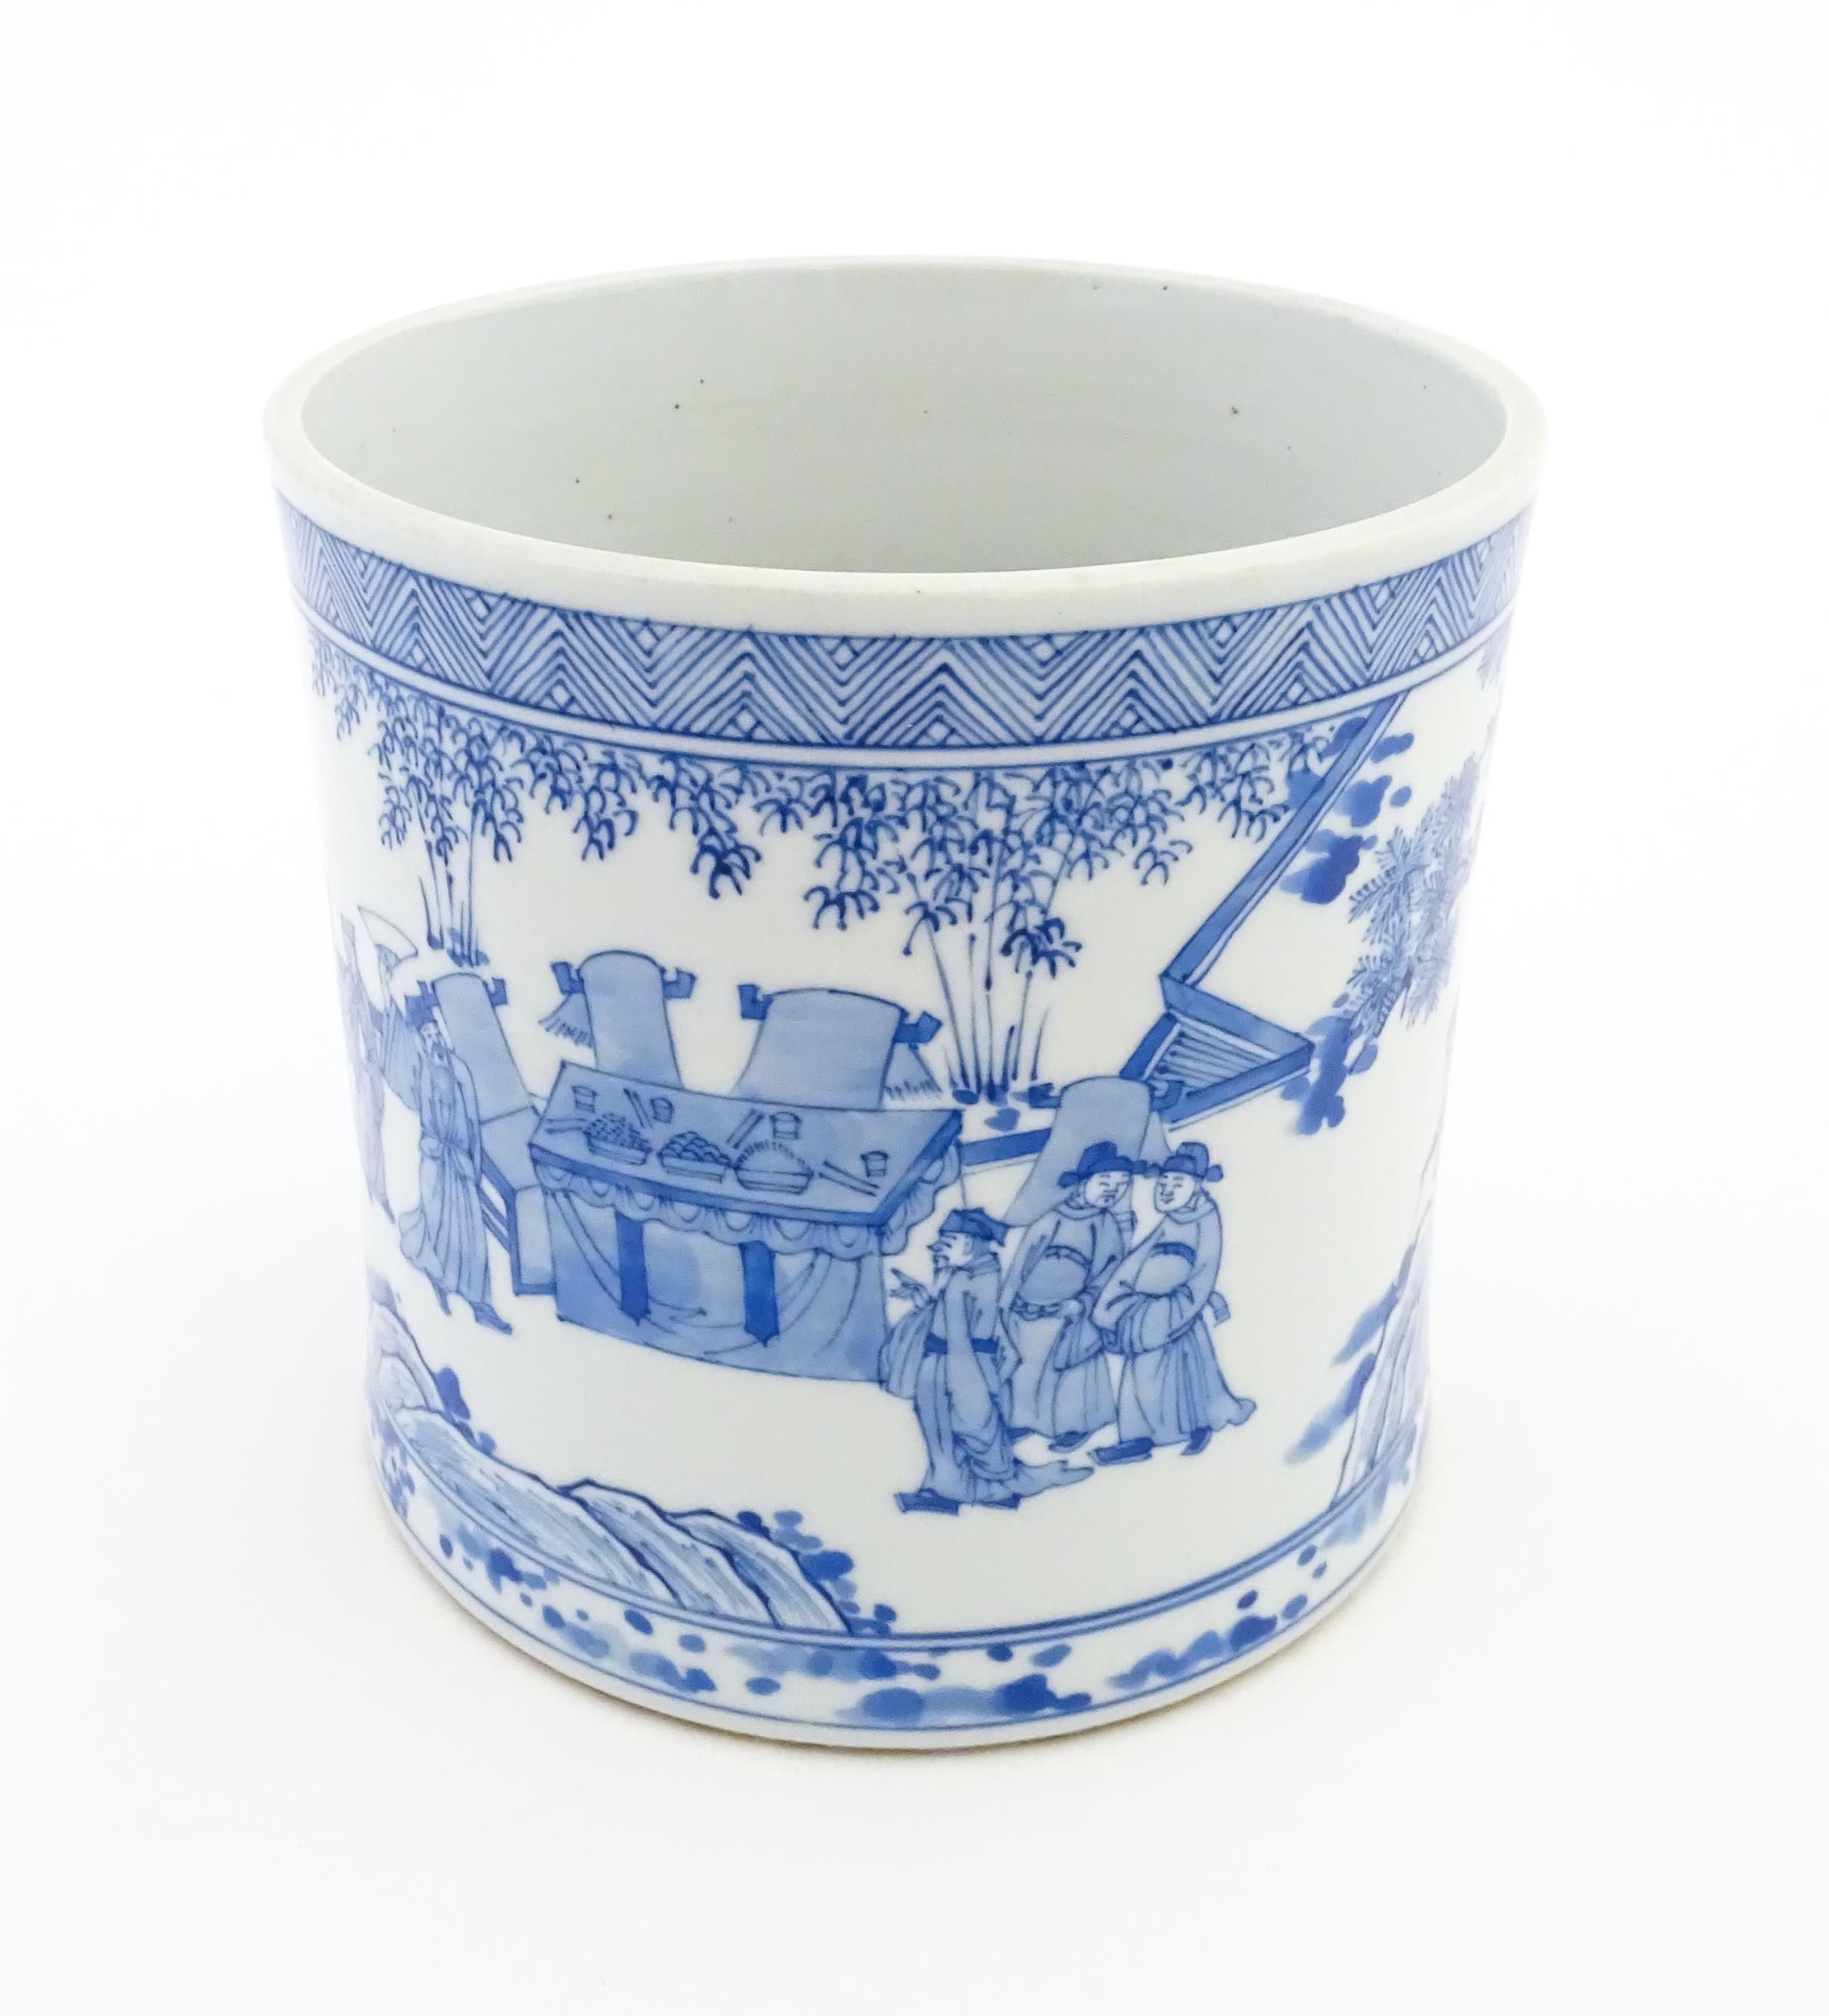 A Chinese blue and white vase / planter decorated with figures in a garden setting with a feast, and - Image 6 of 8